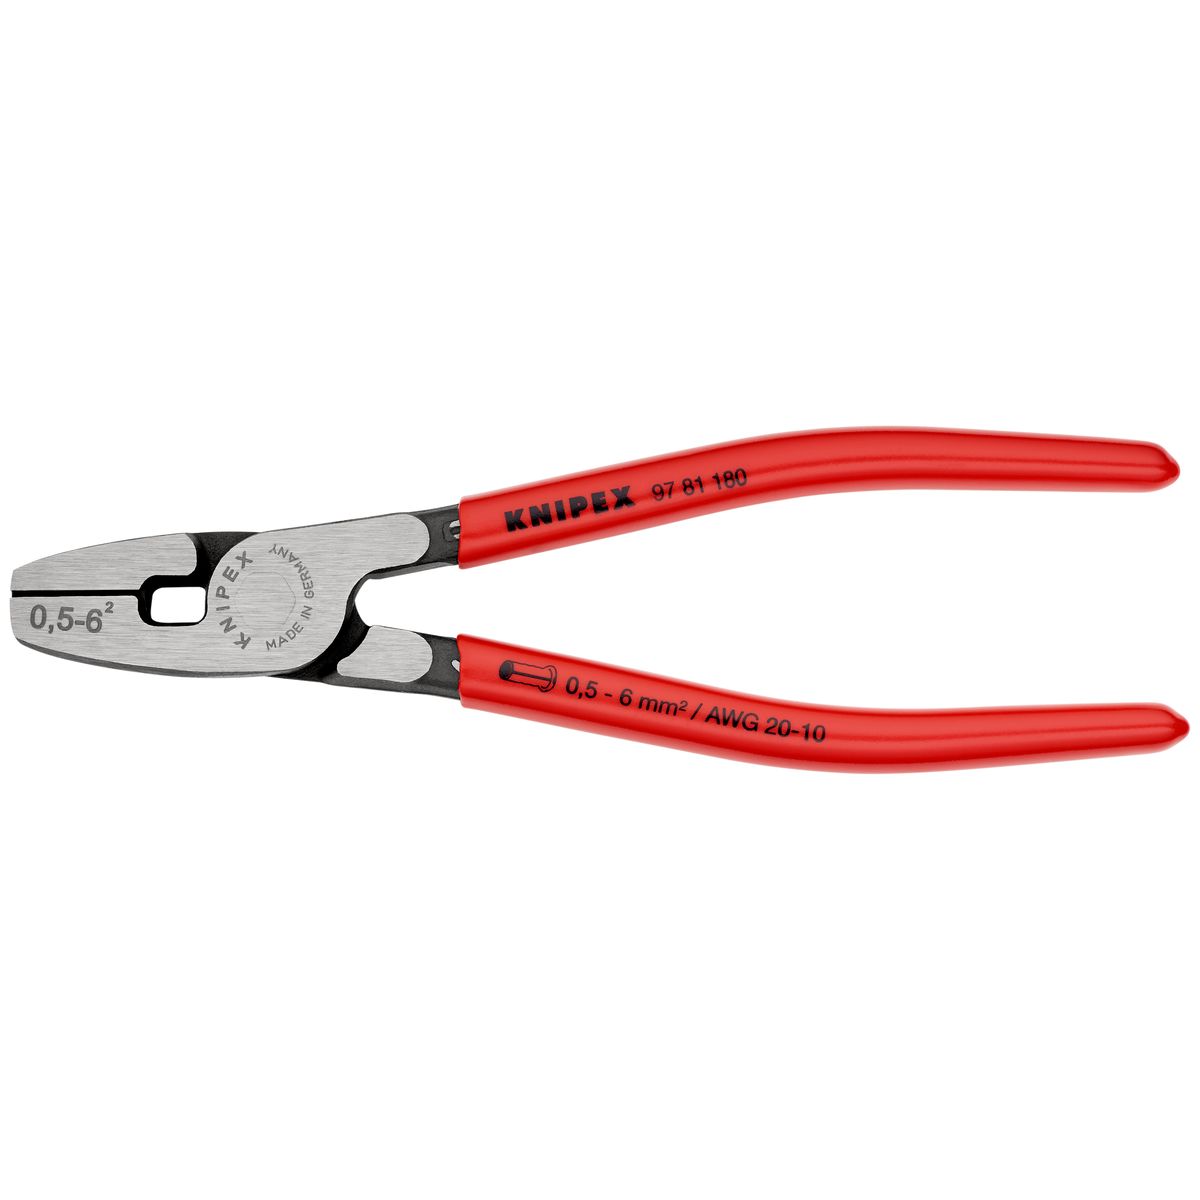 CRIMPING PLIERS F. CABLE LINKS 9781180 Knipex